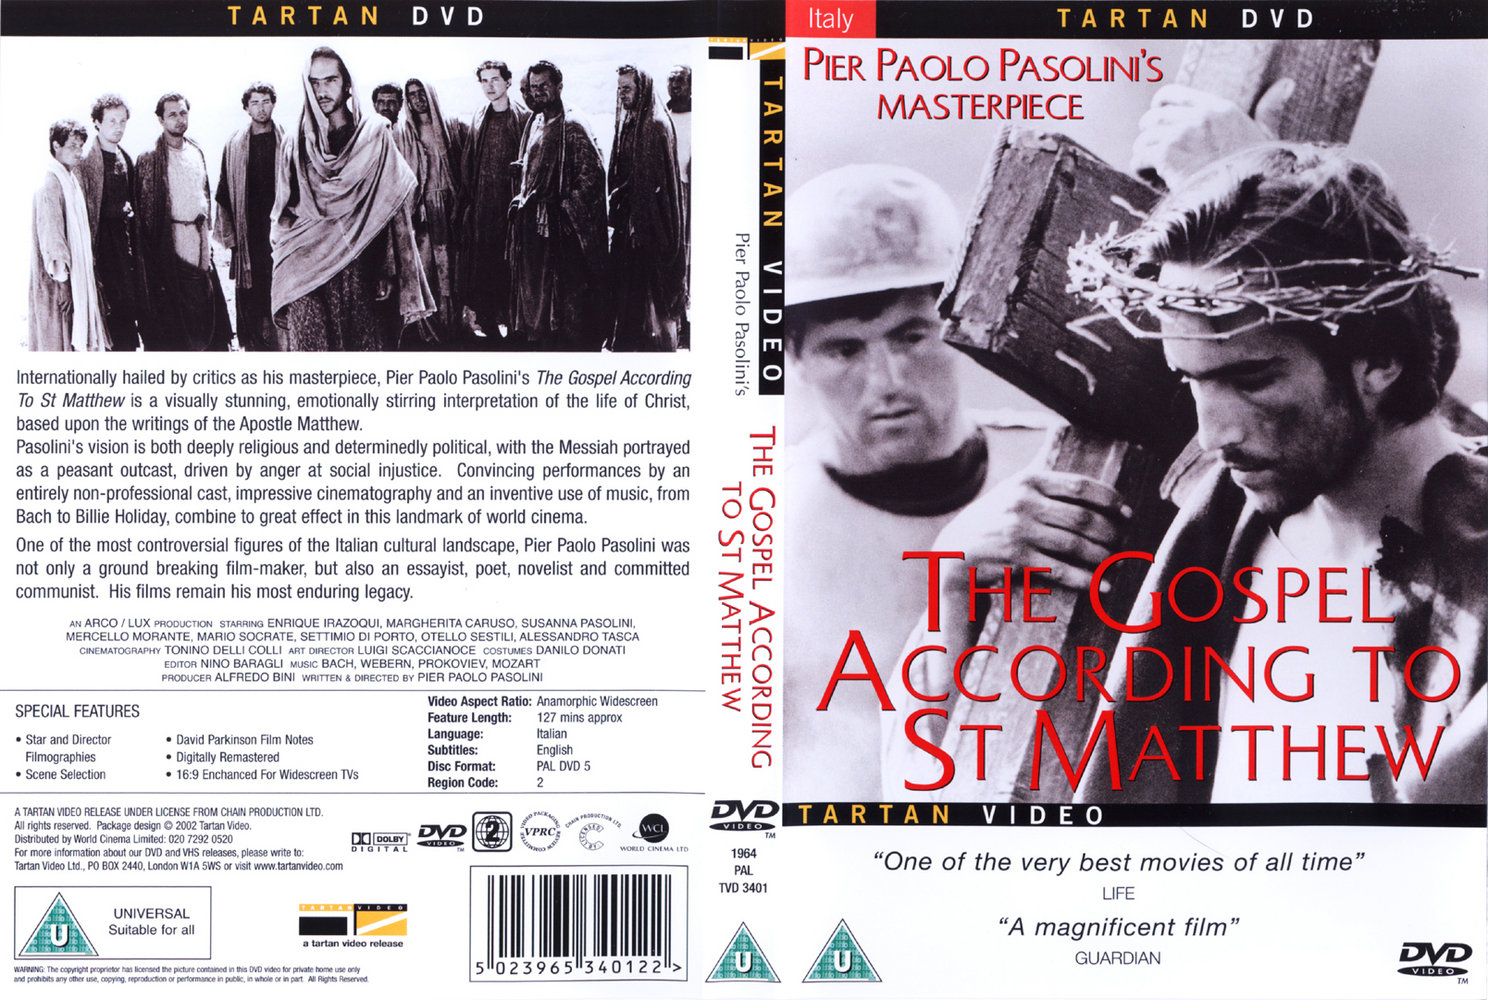 The Gospel According To St Matthew Pier Paolo Pasolini 1964 British Dvd Tartan Video Free Download Borrow And Streaming Internet Archive There are no featured reviews for because the movie has not released yet (). the gospel according to st matthew